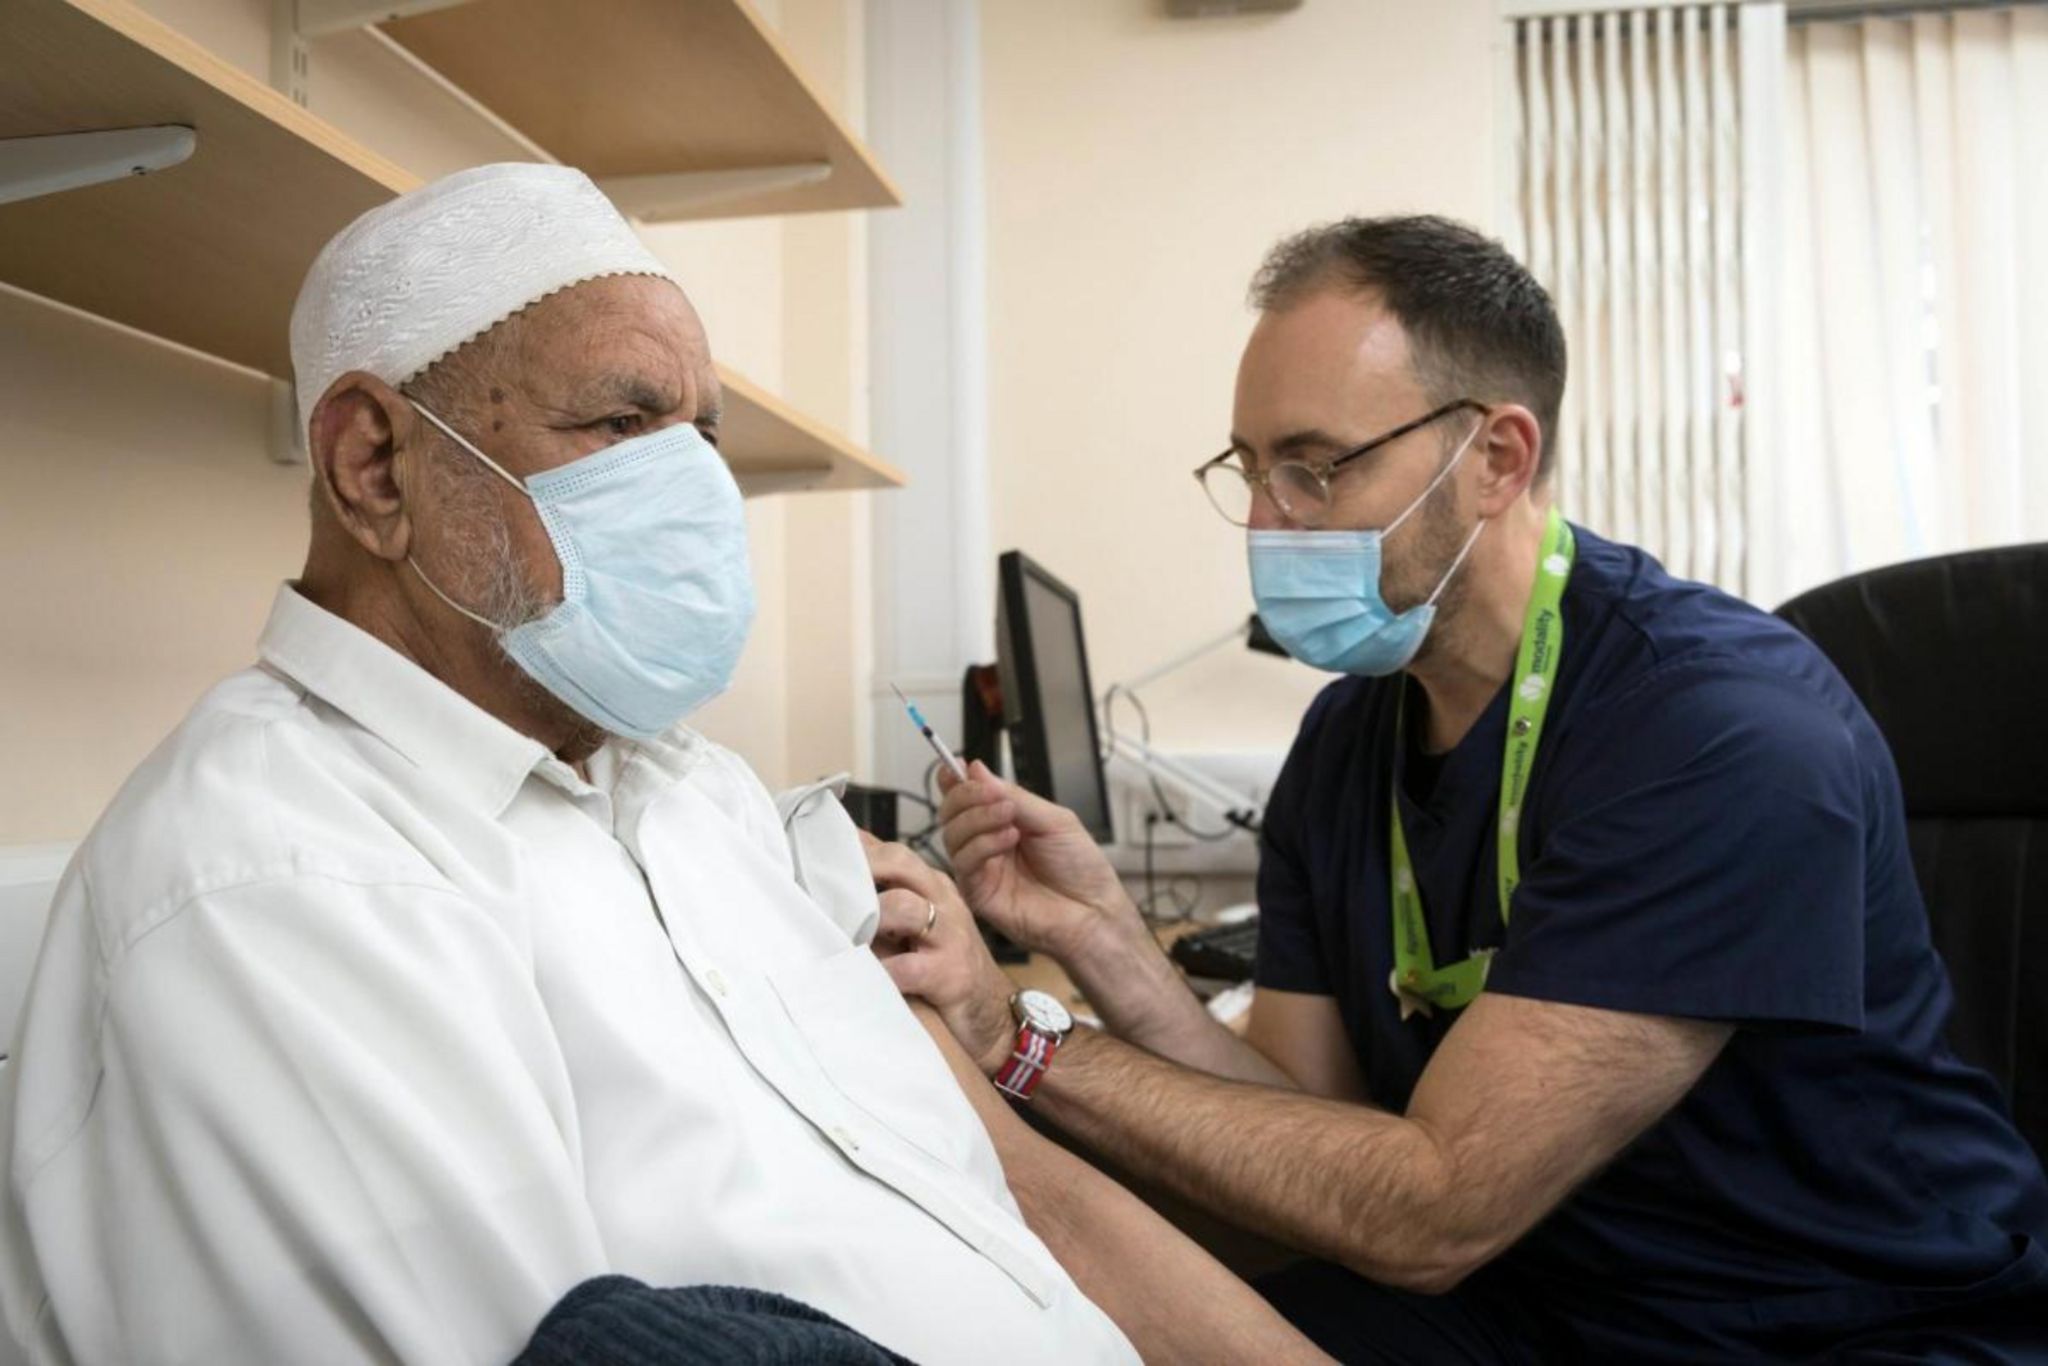 Mohammed Bostan, 95, is vaccinated in December